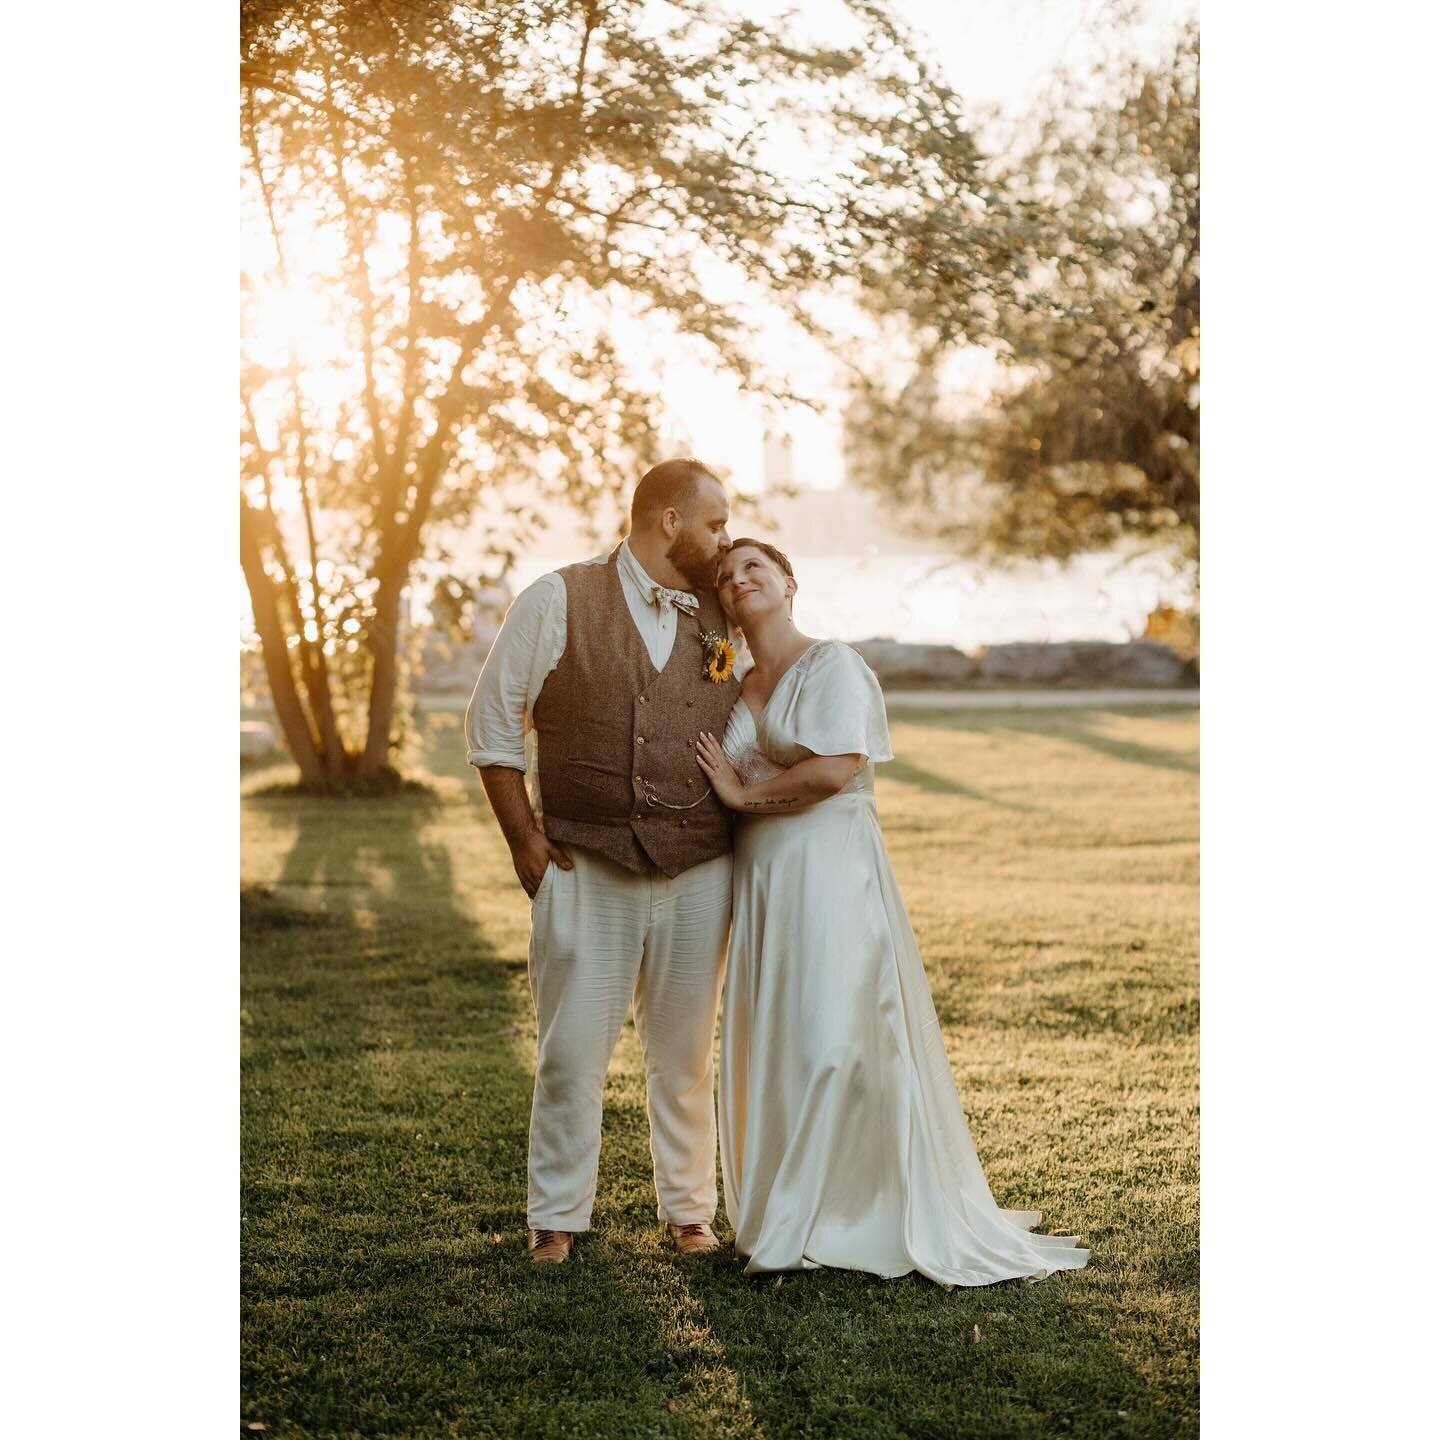 Some frames from S+W&rsquo;s Toronto Island Wedding, in no particular order.

This day was perfect. Perfect light. Perfect vibes. Perfect location. Perfect couple. Just 10/10 all around. 
.
.
.
Ceremony Venue: The Shaw House Event Centre
Reception Ve